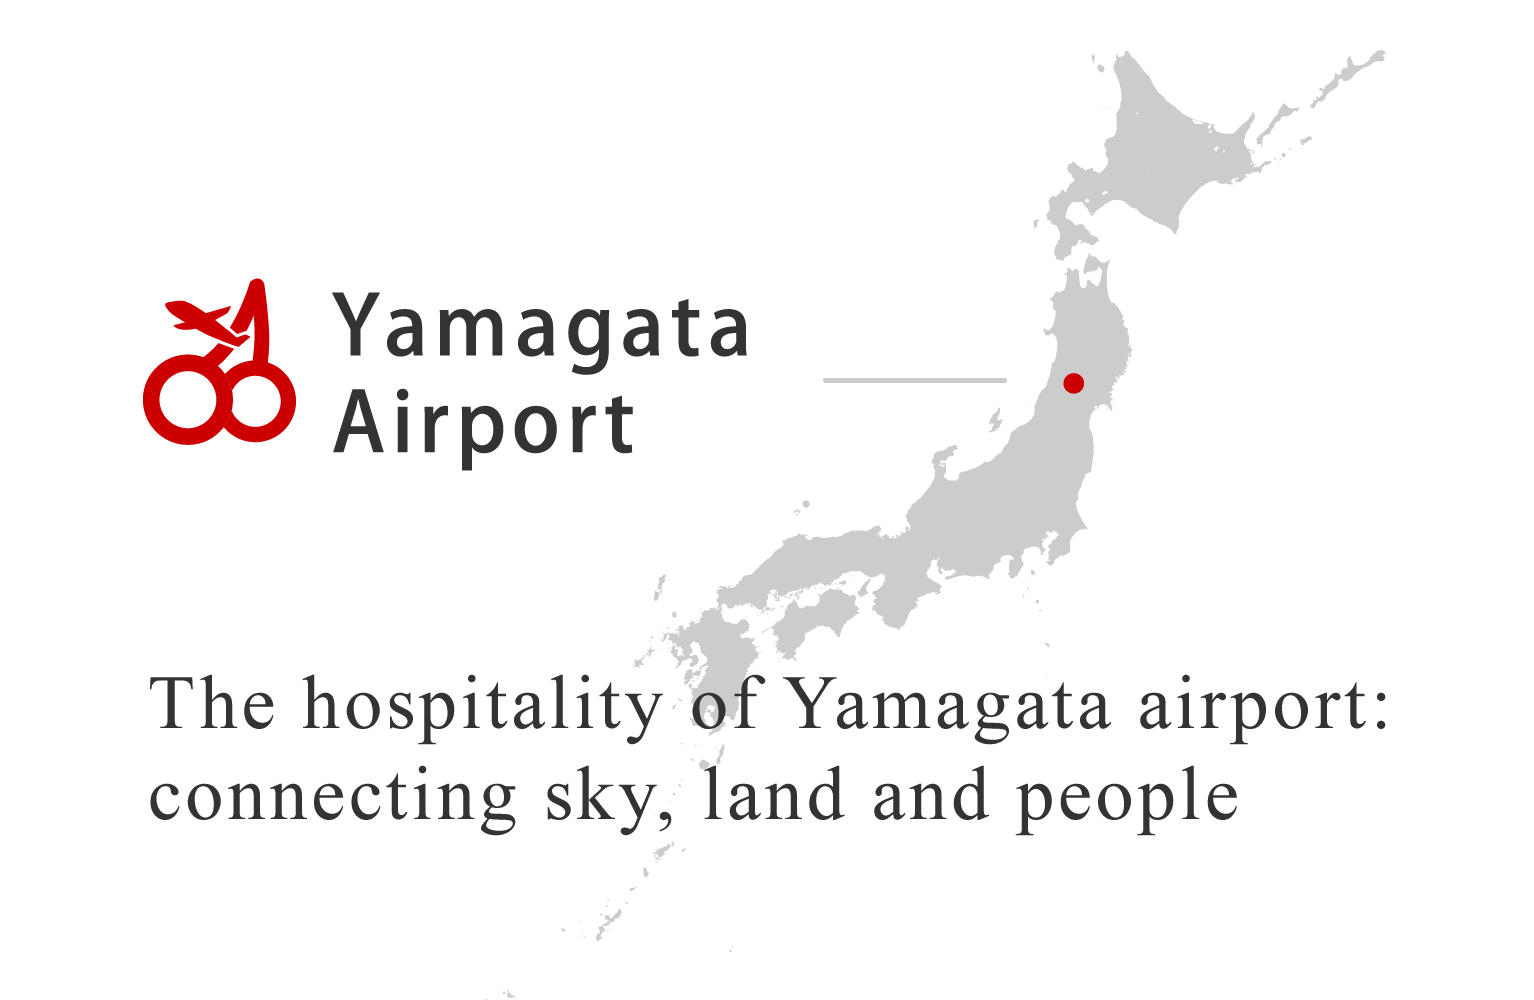 Yamagata airport, connecting sky, land and people with our hospitality